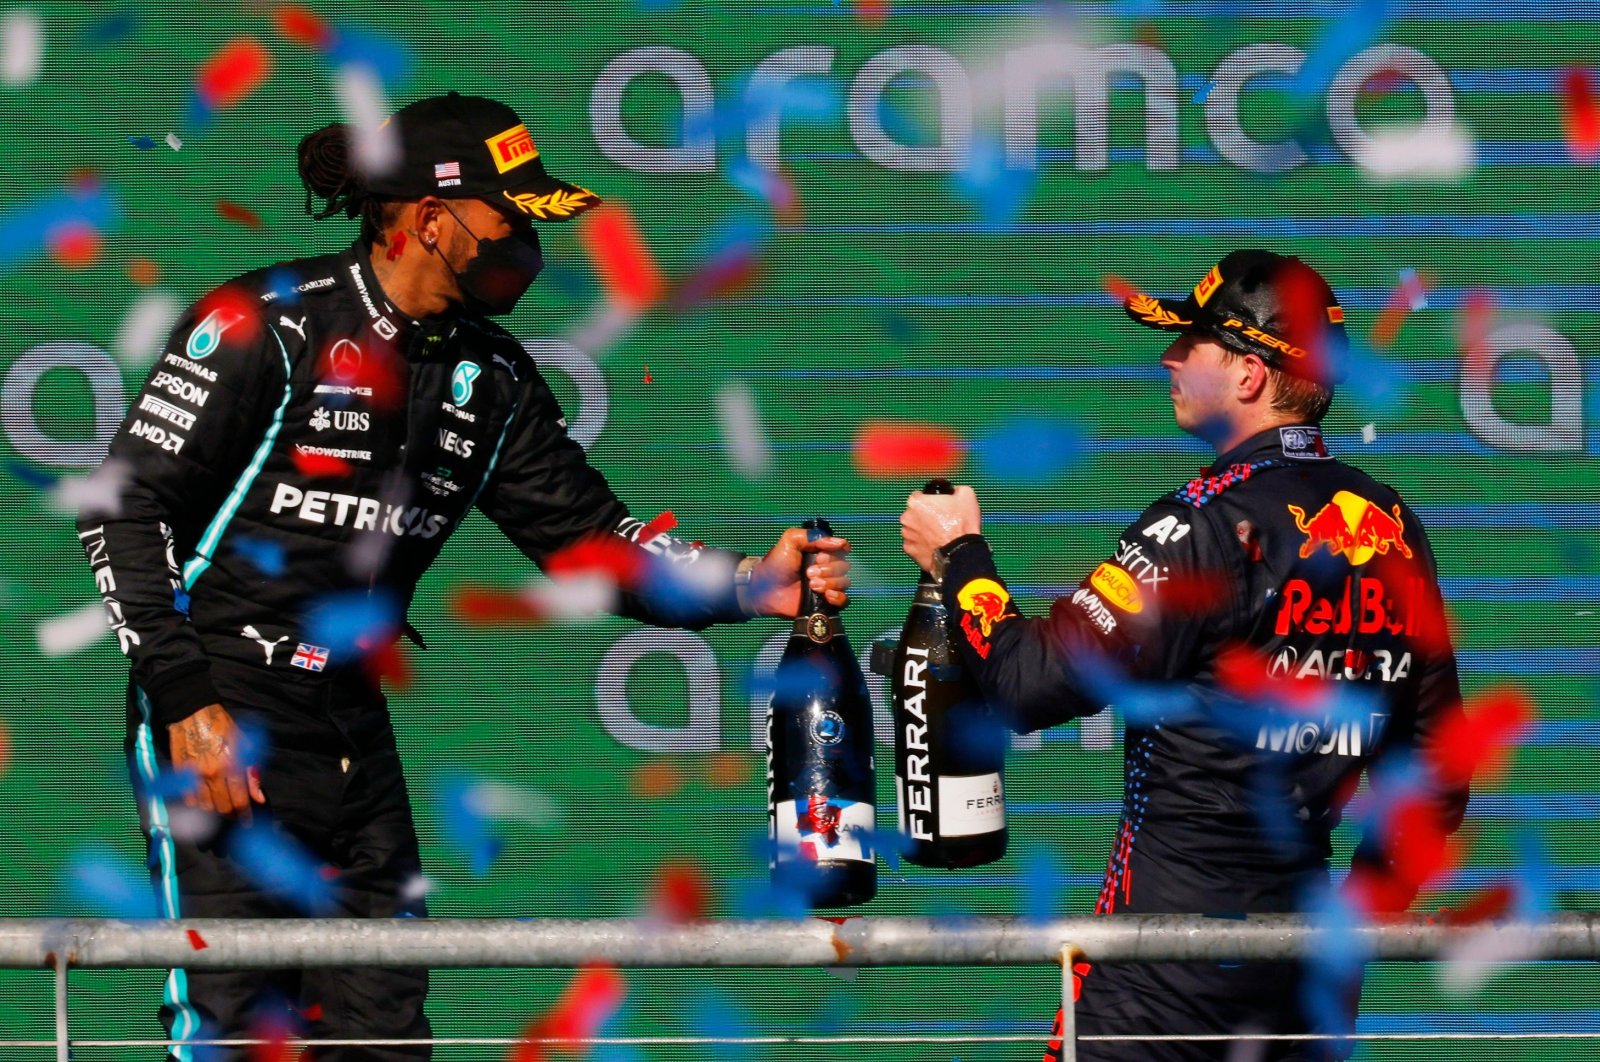 Red Bull's Max Verstappen (R) celebrates on the podium with second-placed Mercedes' Lewis Hamilton after winning the Formula One United States Grand Prix, Austin, Texas, U.S., Oct. 24, 2021. (Reuters Photo)